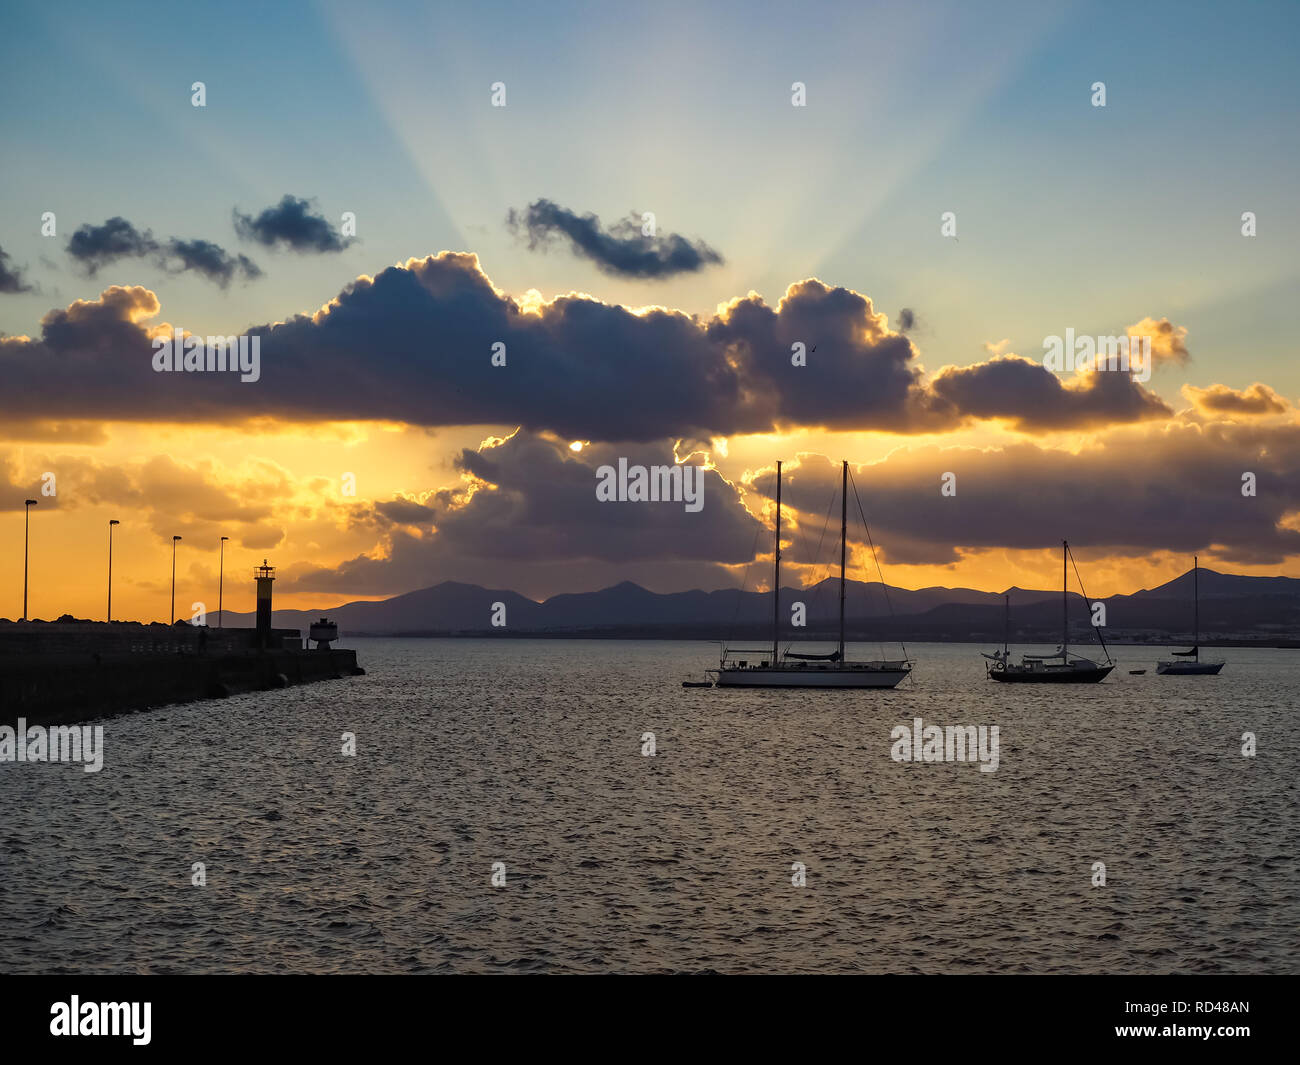 Dramatic sky with upward light rays at sunset over the ocean with peaceful sailing boats at Arrecife, Lanzarote, Canary Islands Stock Photo